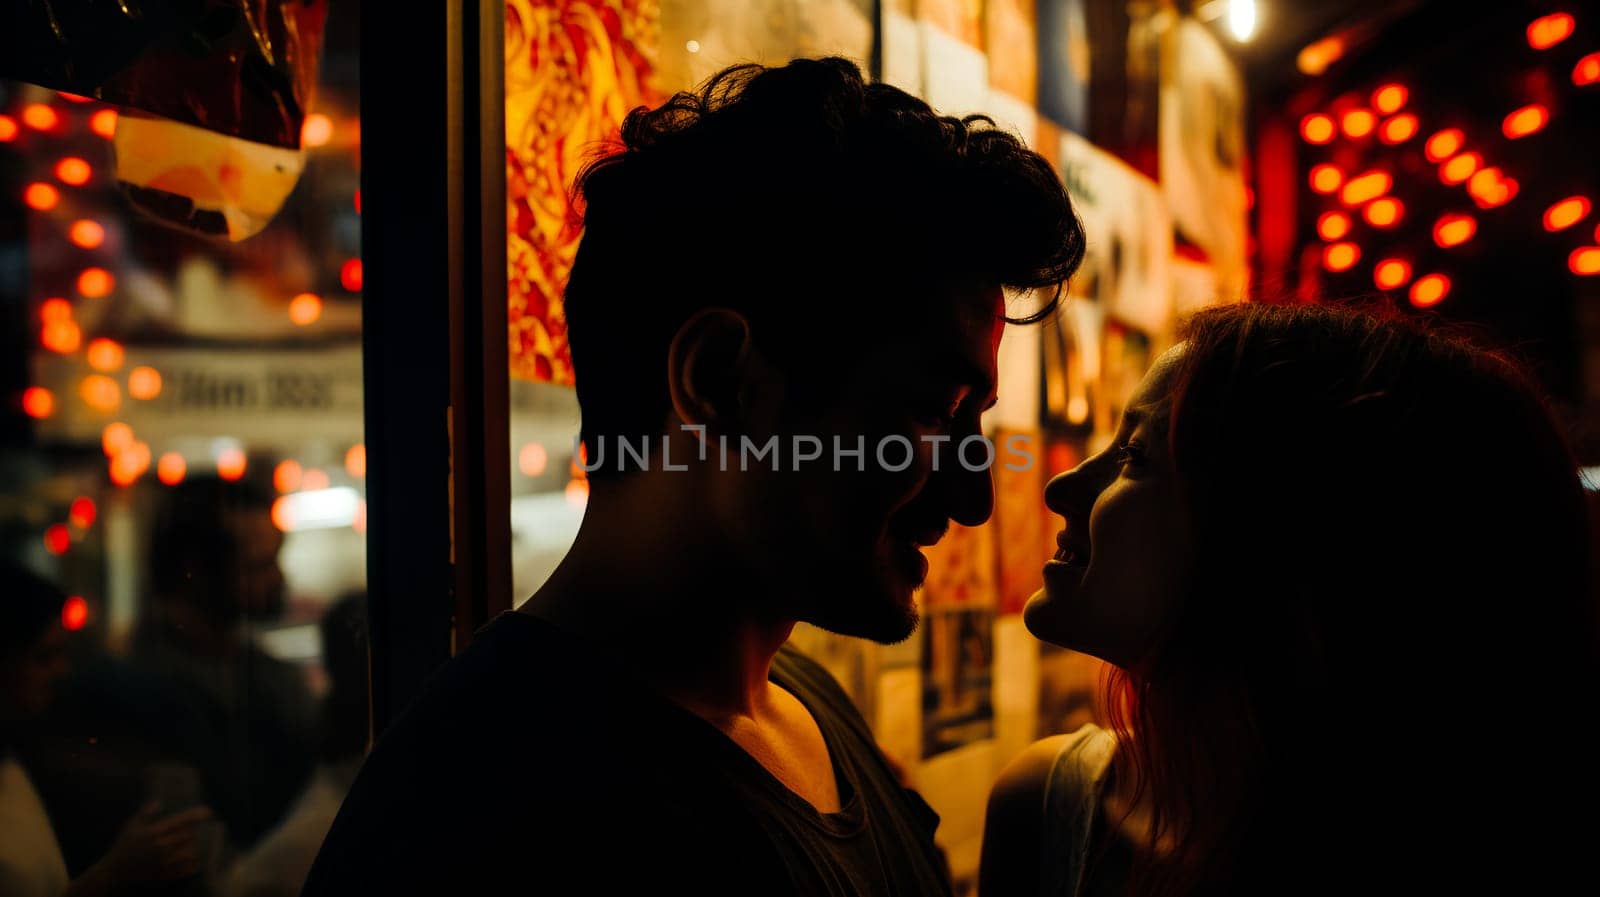 A close-up of a couple sharing an intimate moment, warmly lit by the evening ambiance